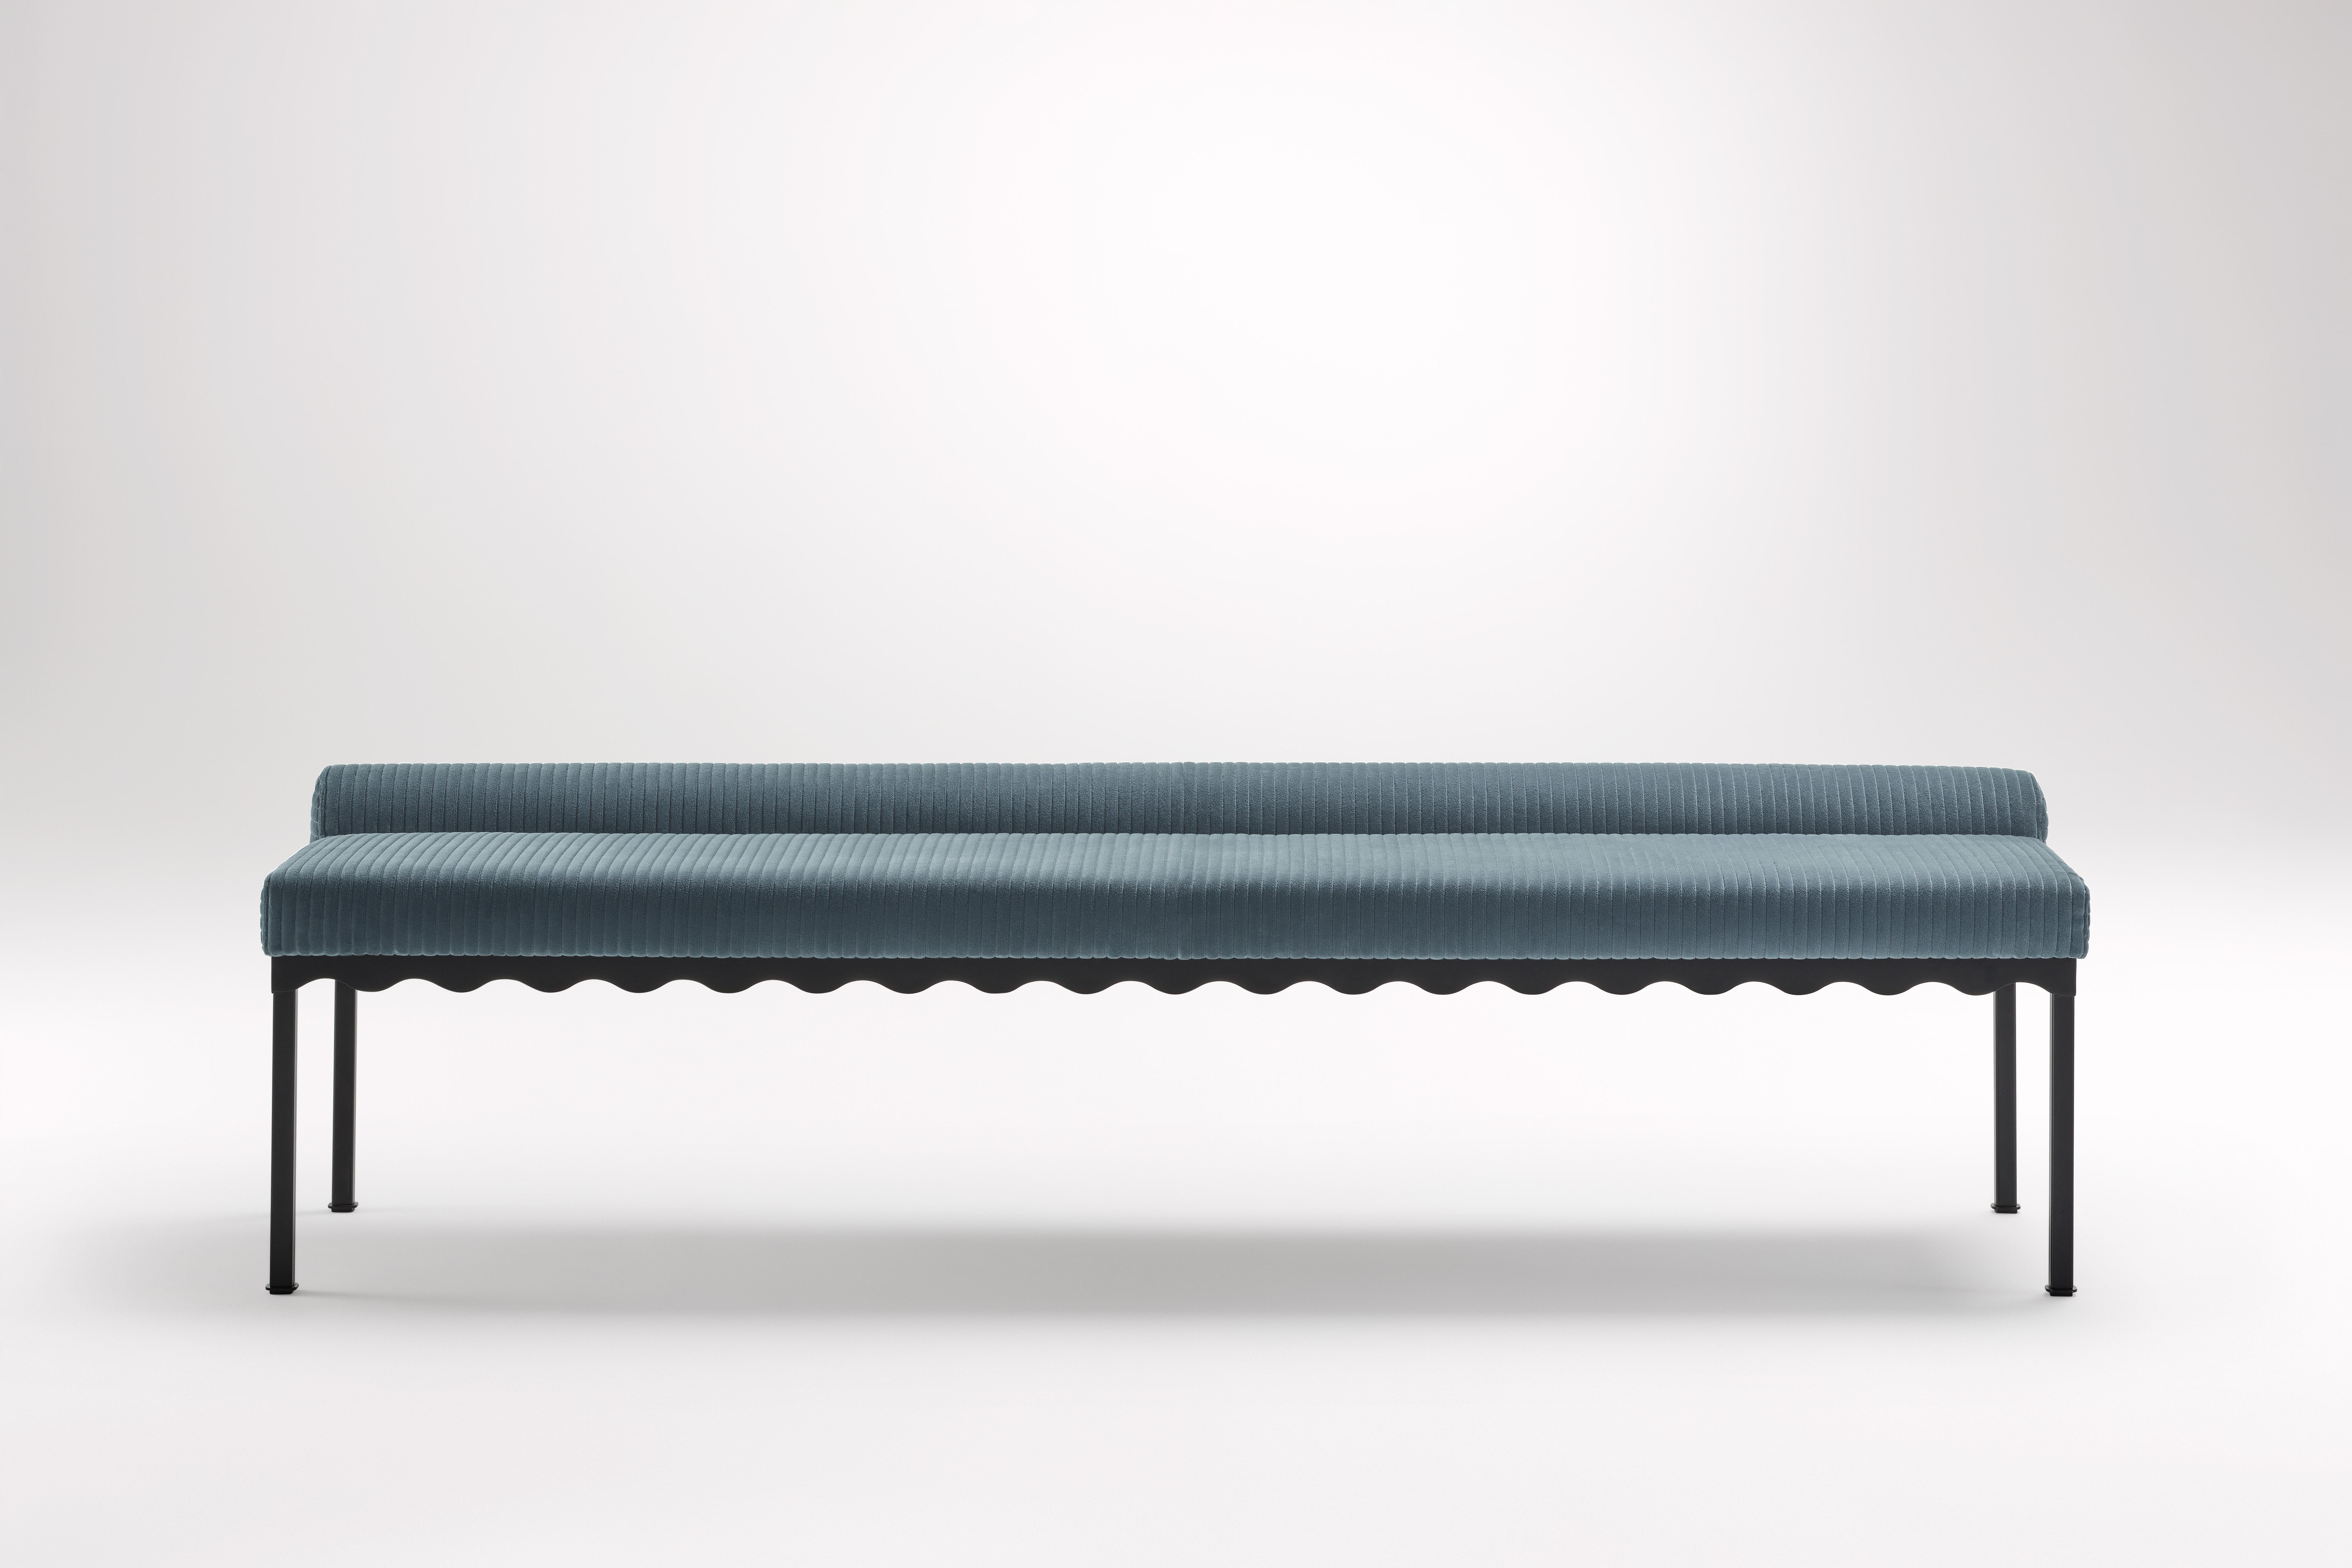 Oracle Bellini 2040 Bench by Coco Flip
Dimensions: D 204 x W 54 x H 52.5 cm
Materials: Timber / Upholstered tops, Powder-coated steel frame. 
Weight: 30kg
Frame Finishes: Textura Black.

Coco Flip is a Melbourne based furniture and lighting design